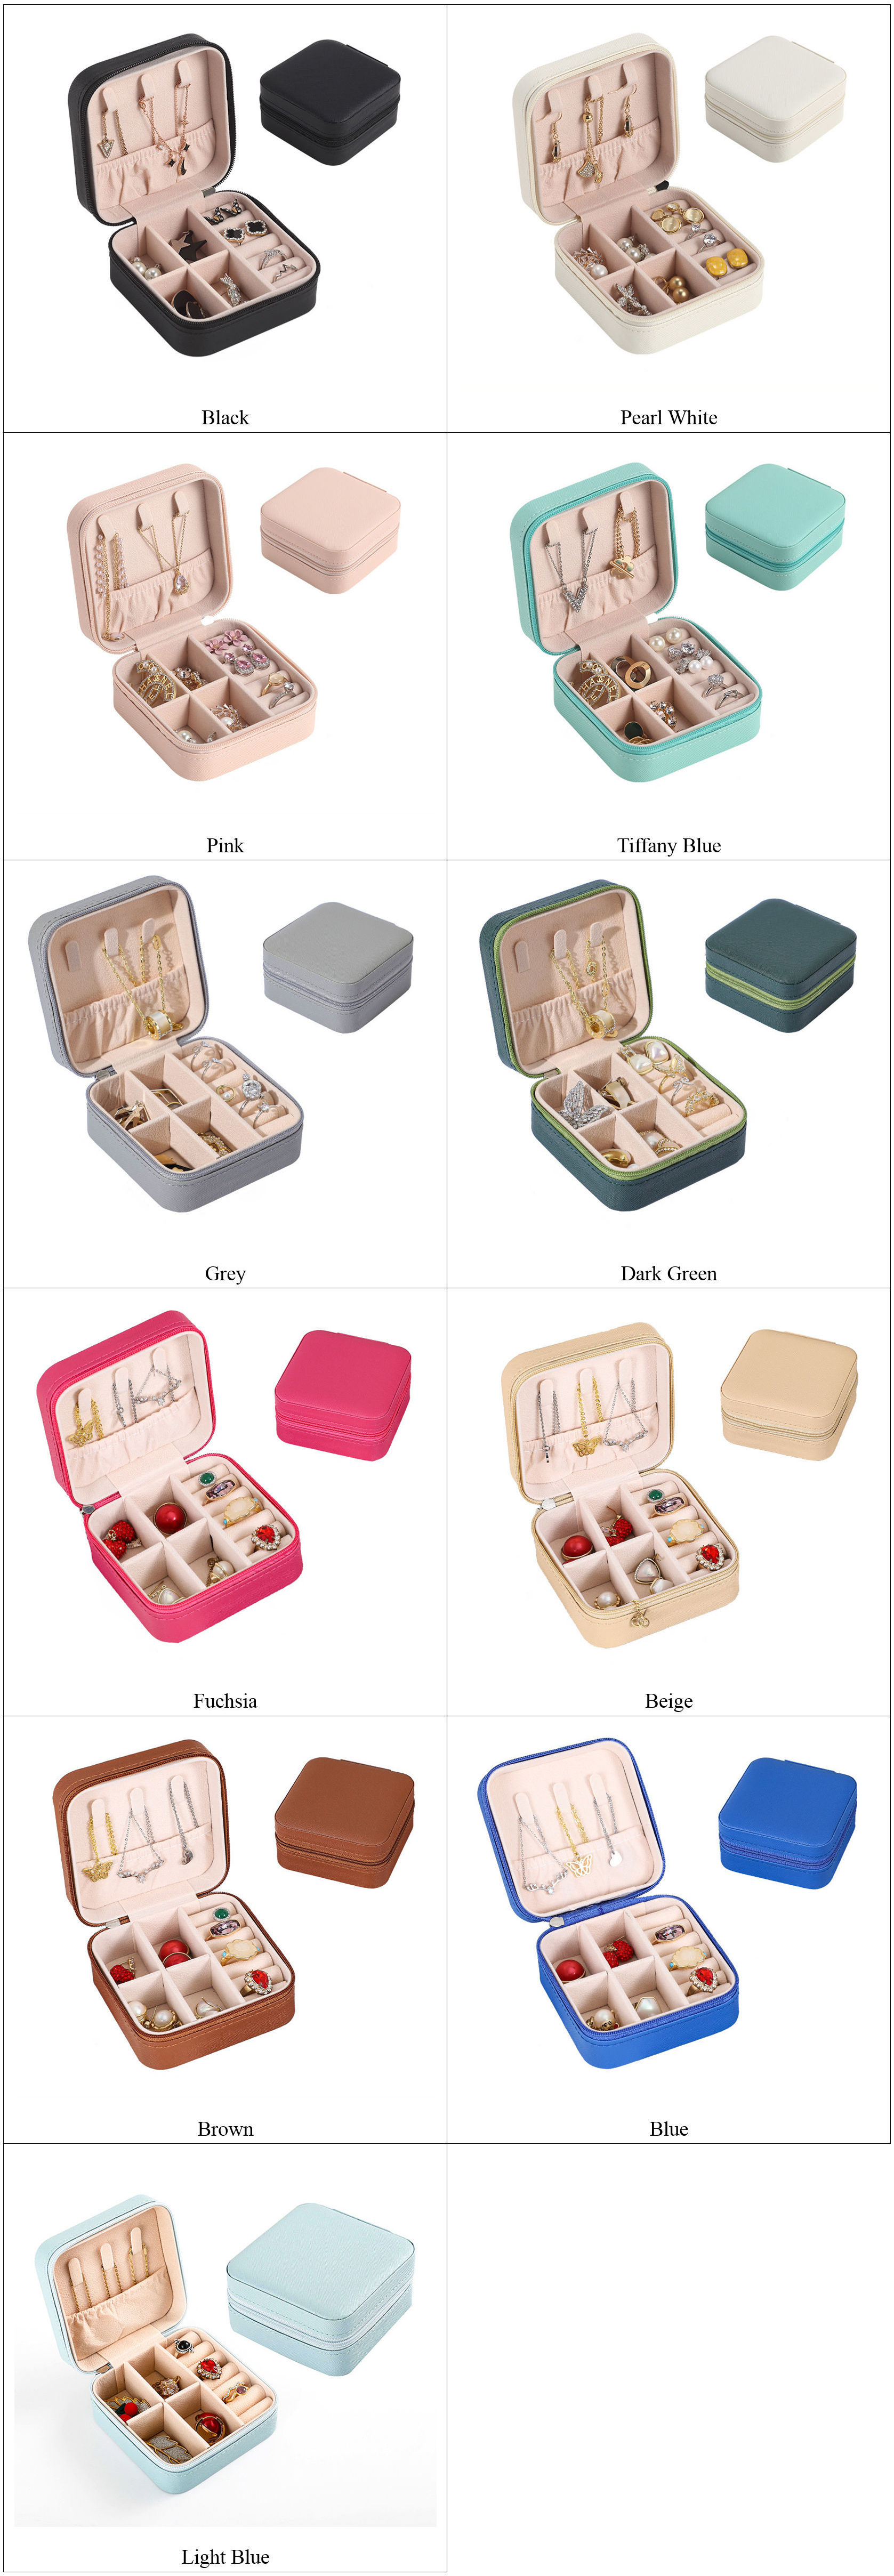 Wholesale Small Jewelry Box with Personalized Logo and Zipper, Stocked Sizes and Colors.